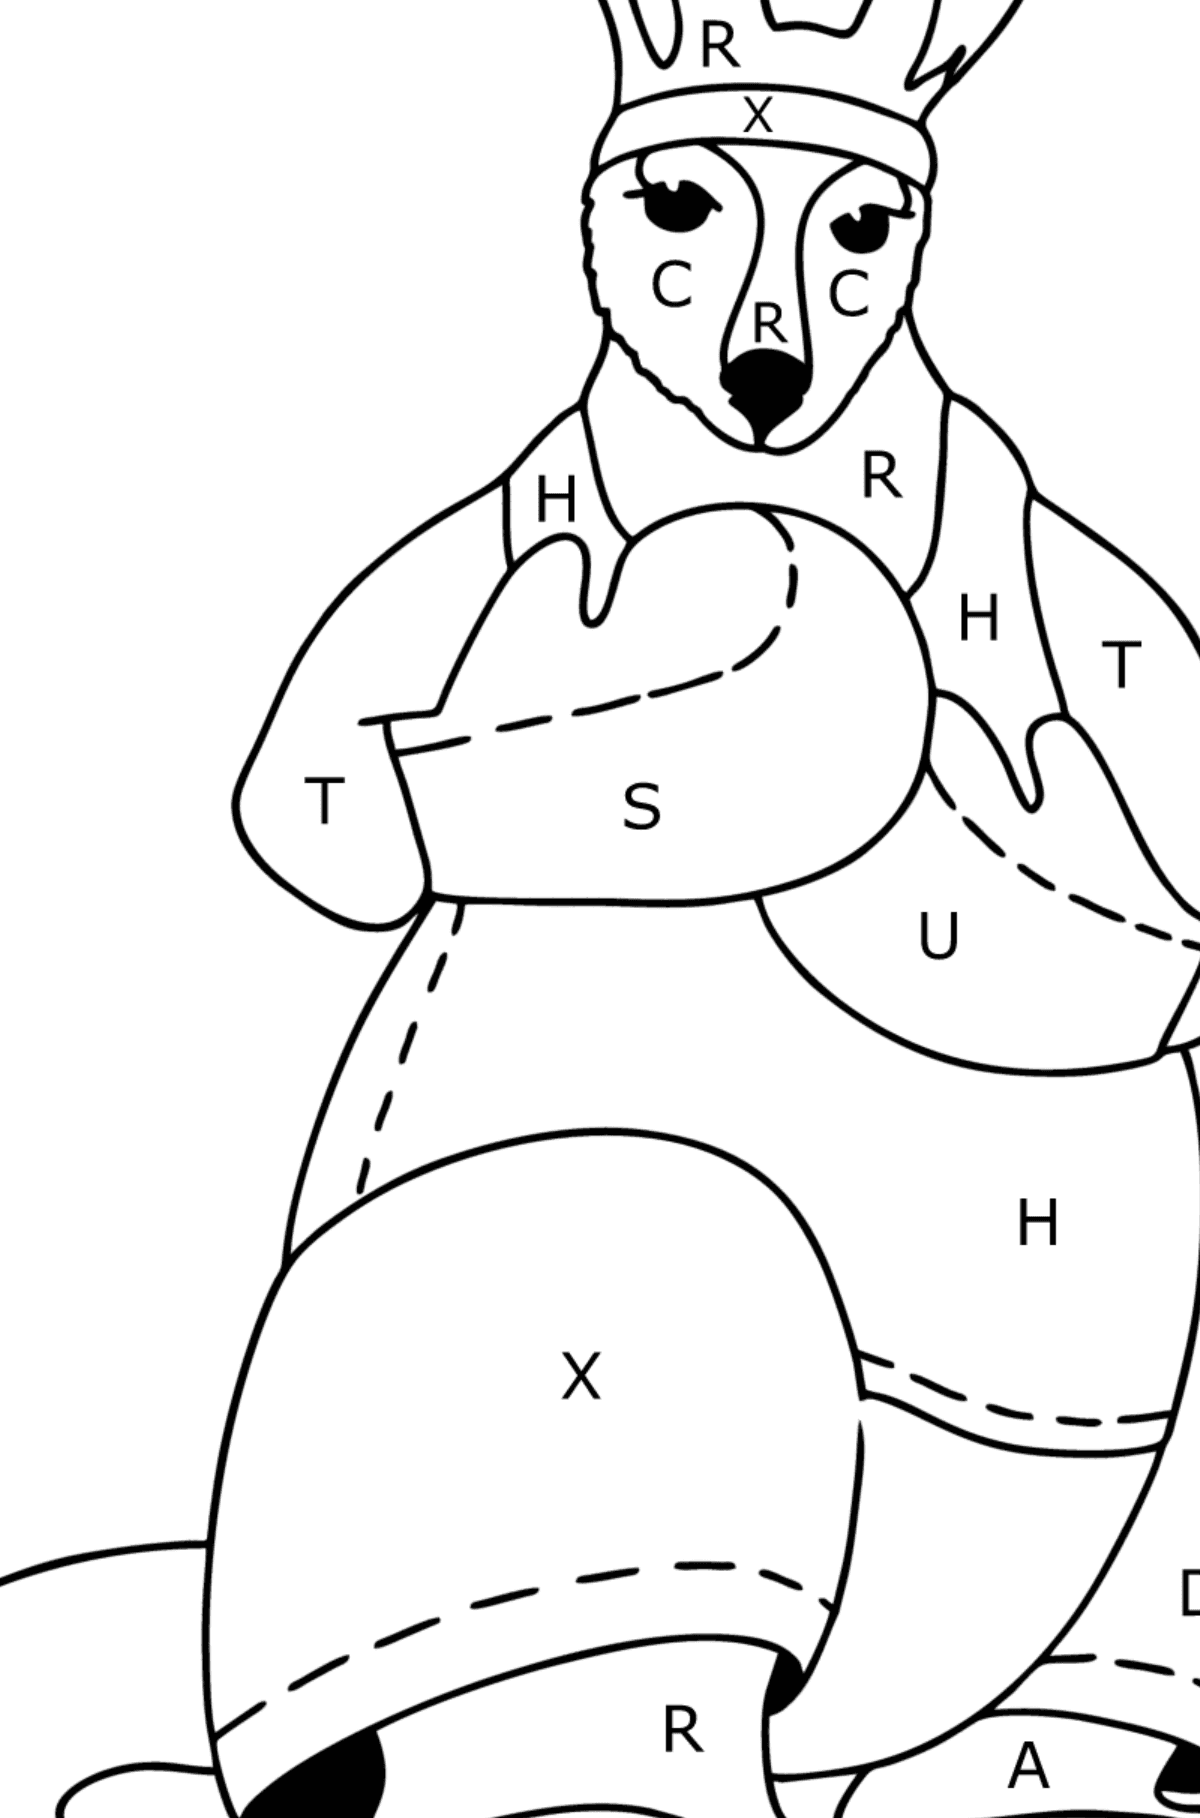 Kangaroo Boxer coloring page - Coloring by Letters for Kids